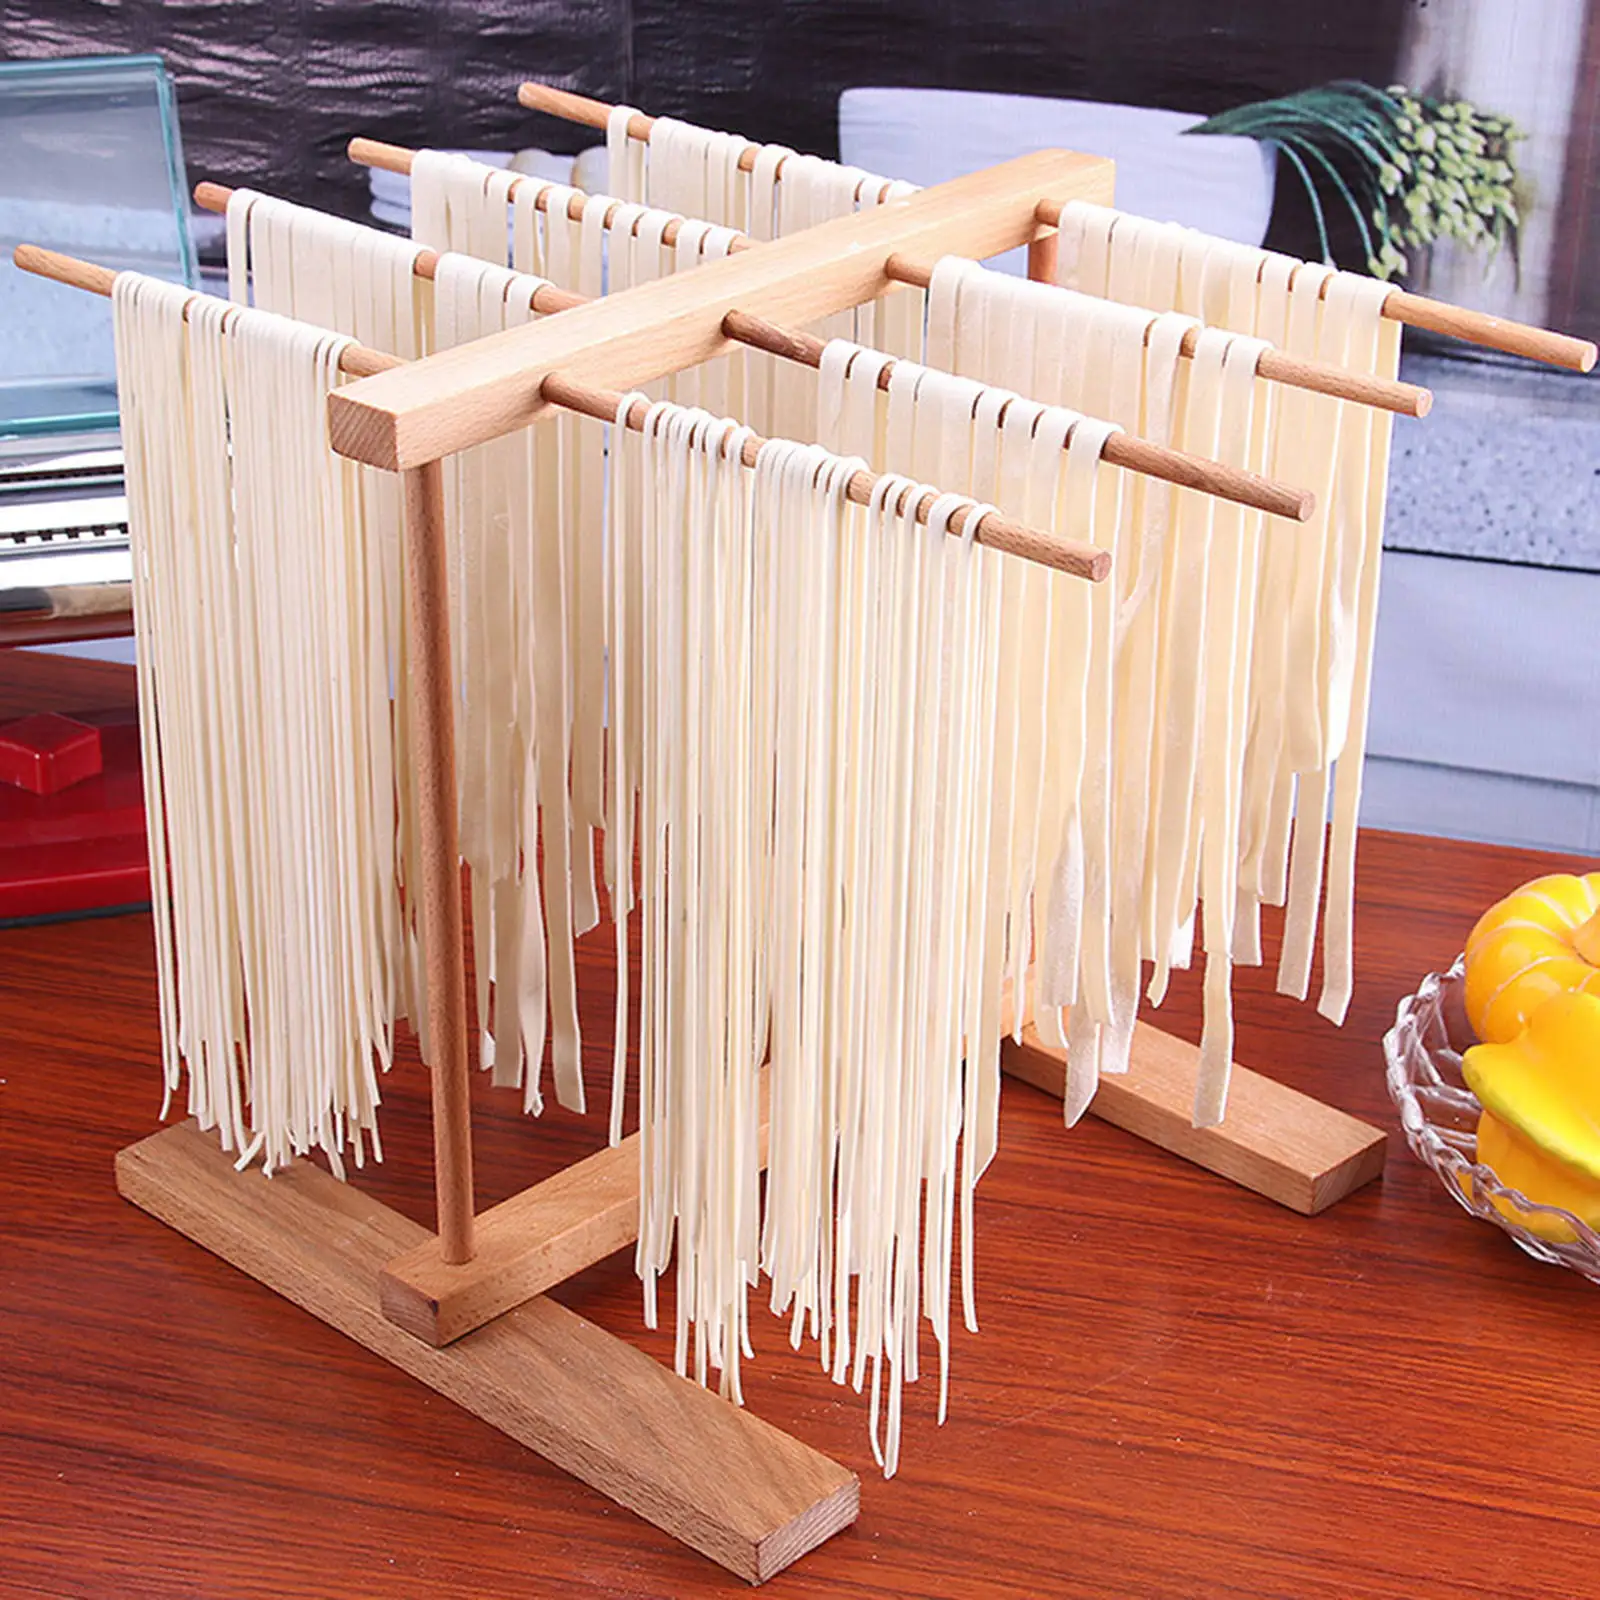 Drying Rack 8 Rows Natural Matrial Beechwood Stand Cooking Tools Pasta Maker Hanger Rack Dryer for Spaghetti Noodles Kitchen